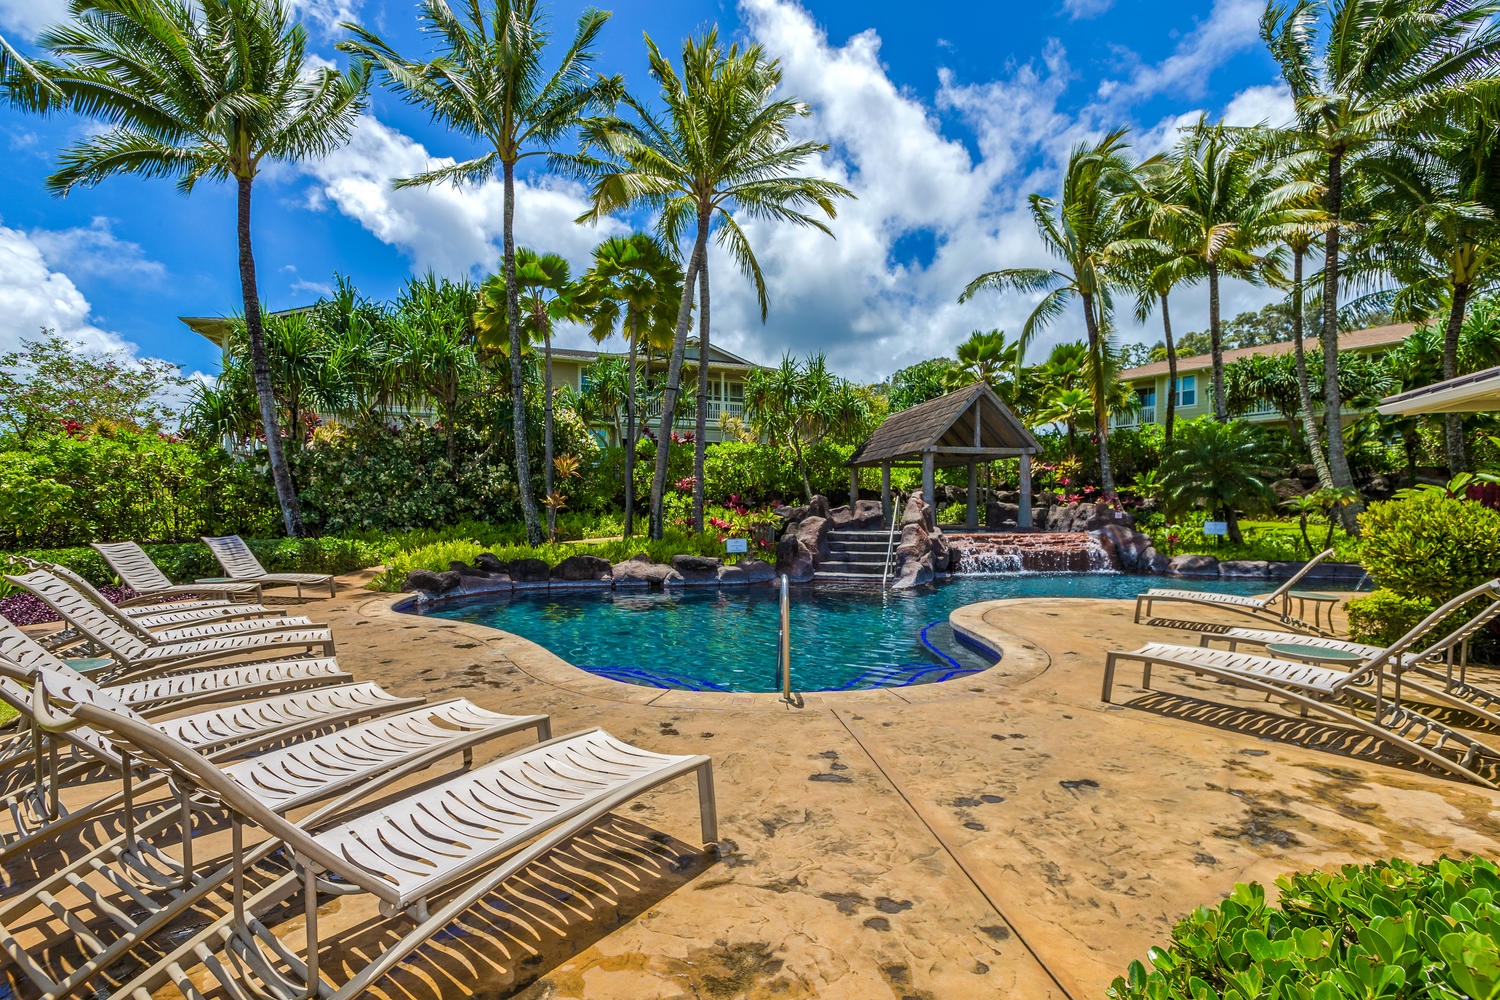 Princeville Vacation Rentals, Leilani Villa - Lounge poolside at the community pool and spa